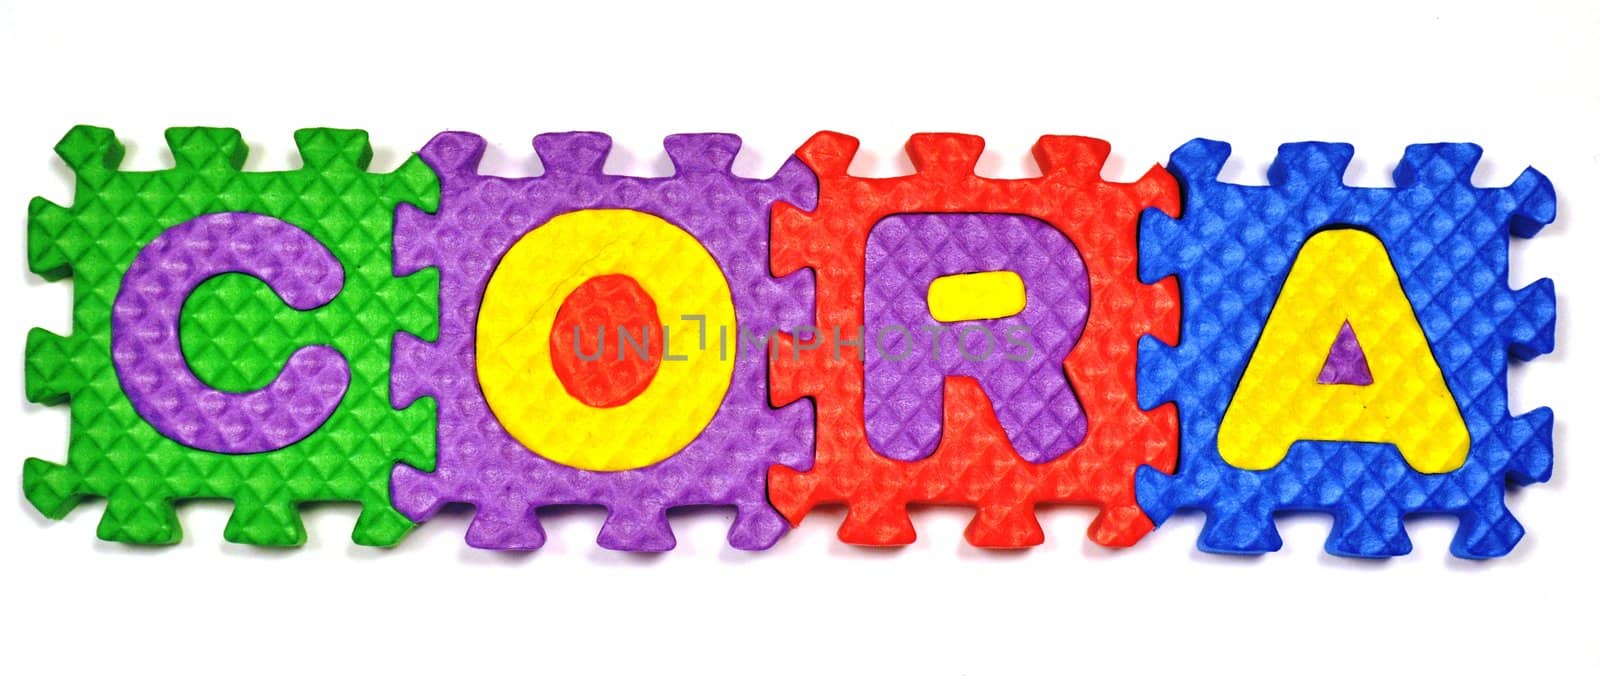 Connected Letters - CORA in center